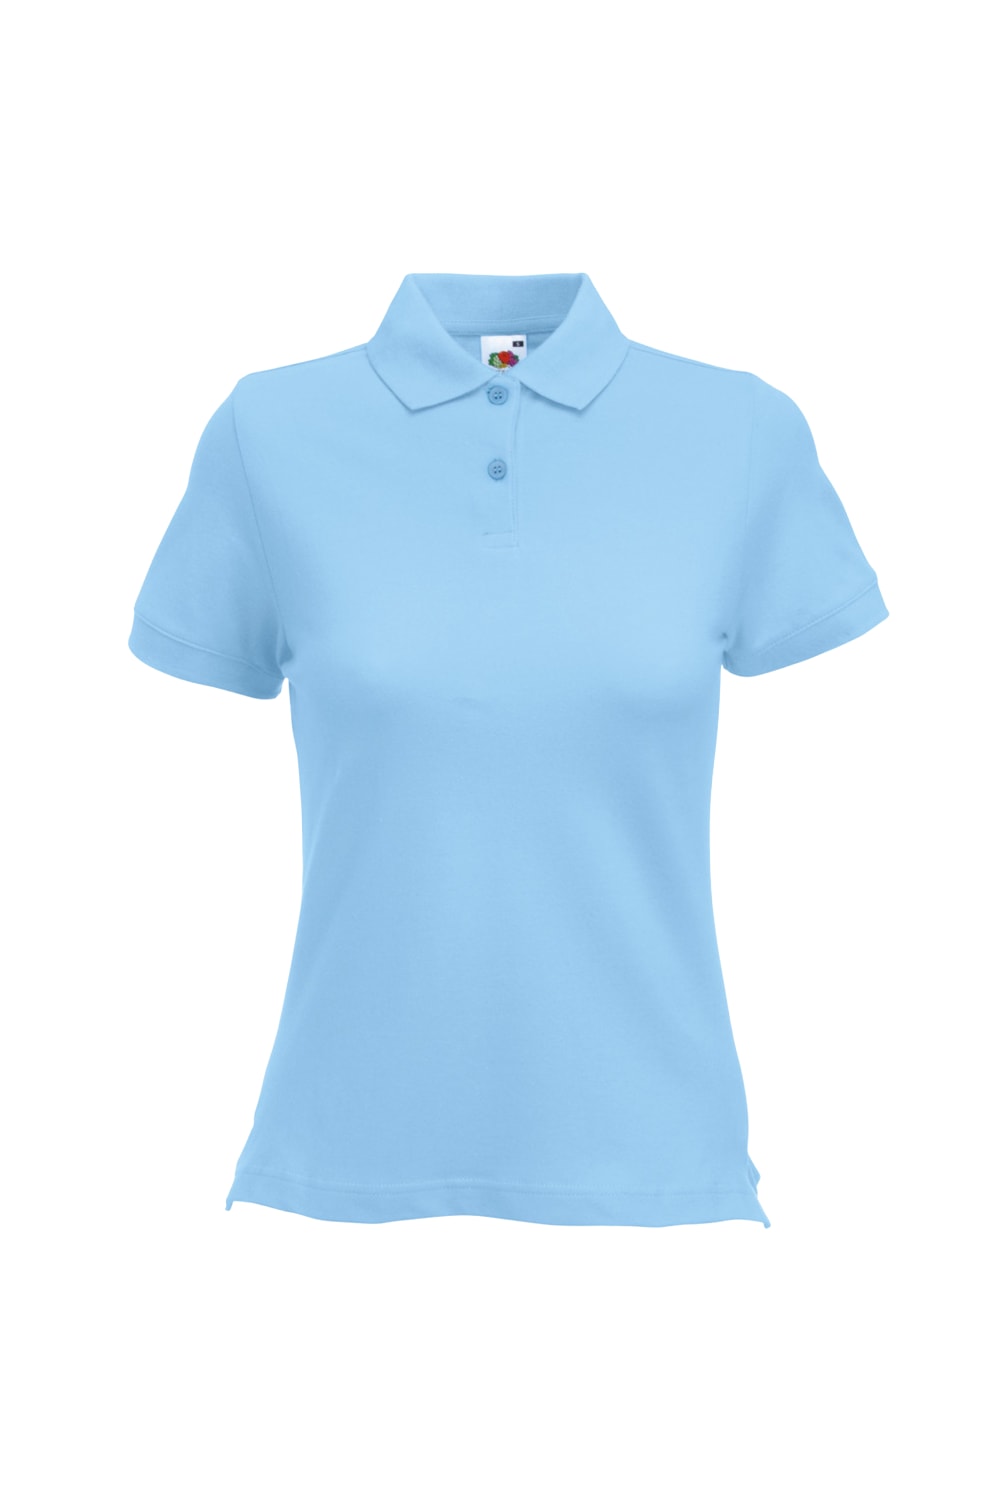 Fruit of the Loom Ladies Lady-Fit Short Sleeve Polo Shirt